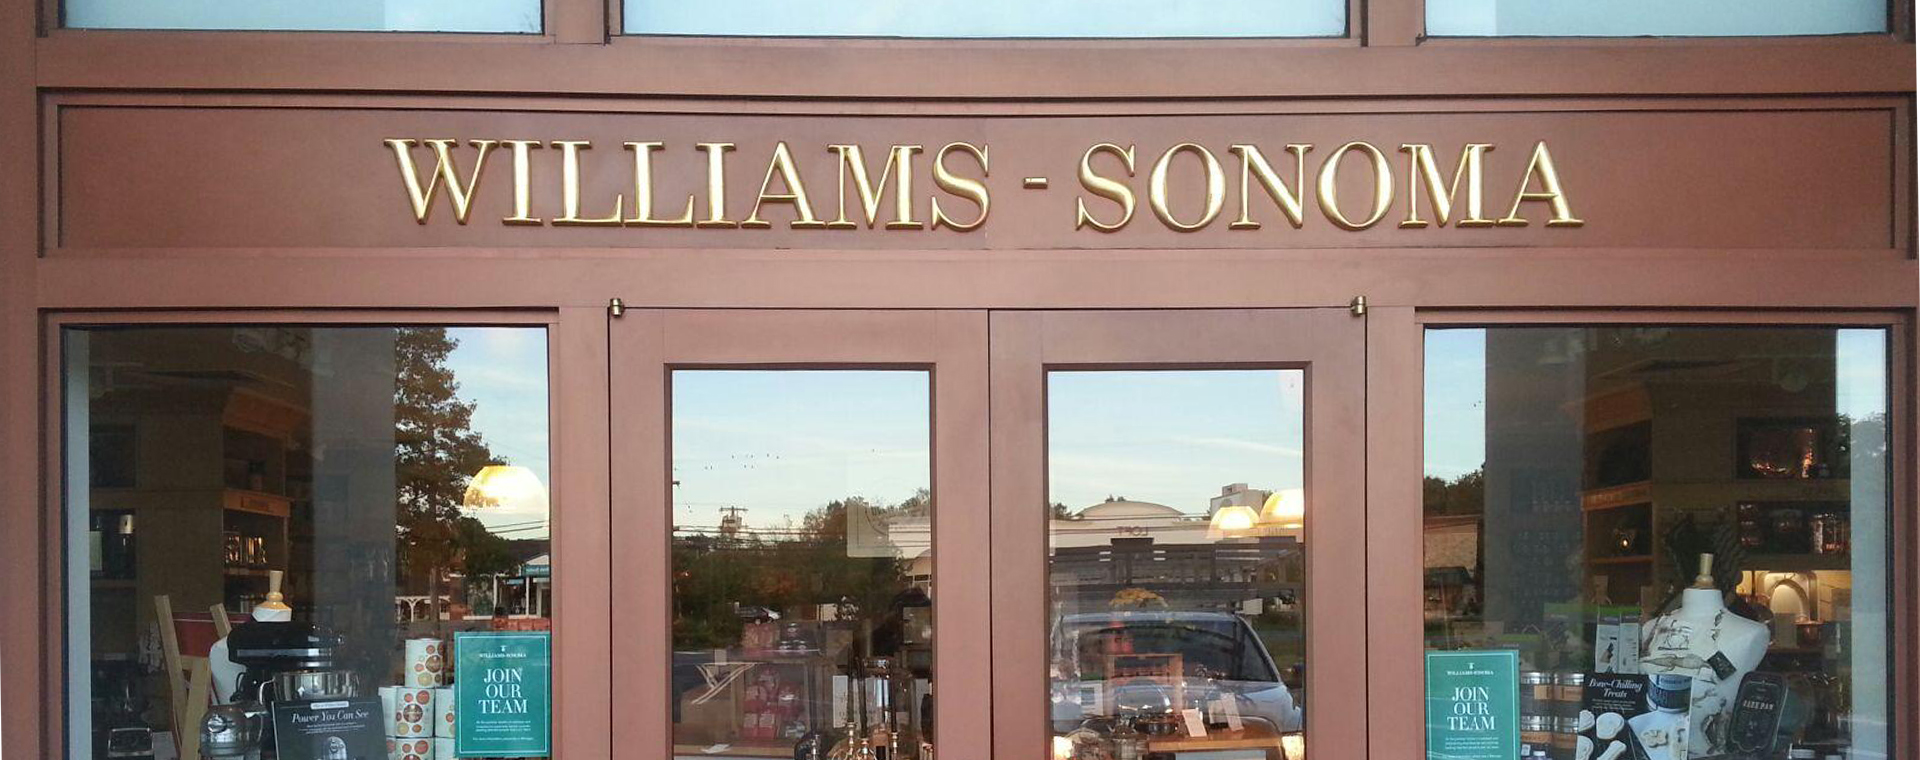 Williams - Sonoma Channel Letter Sign